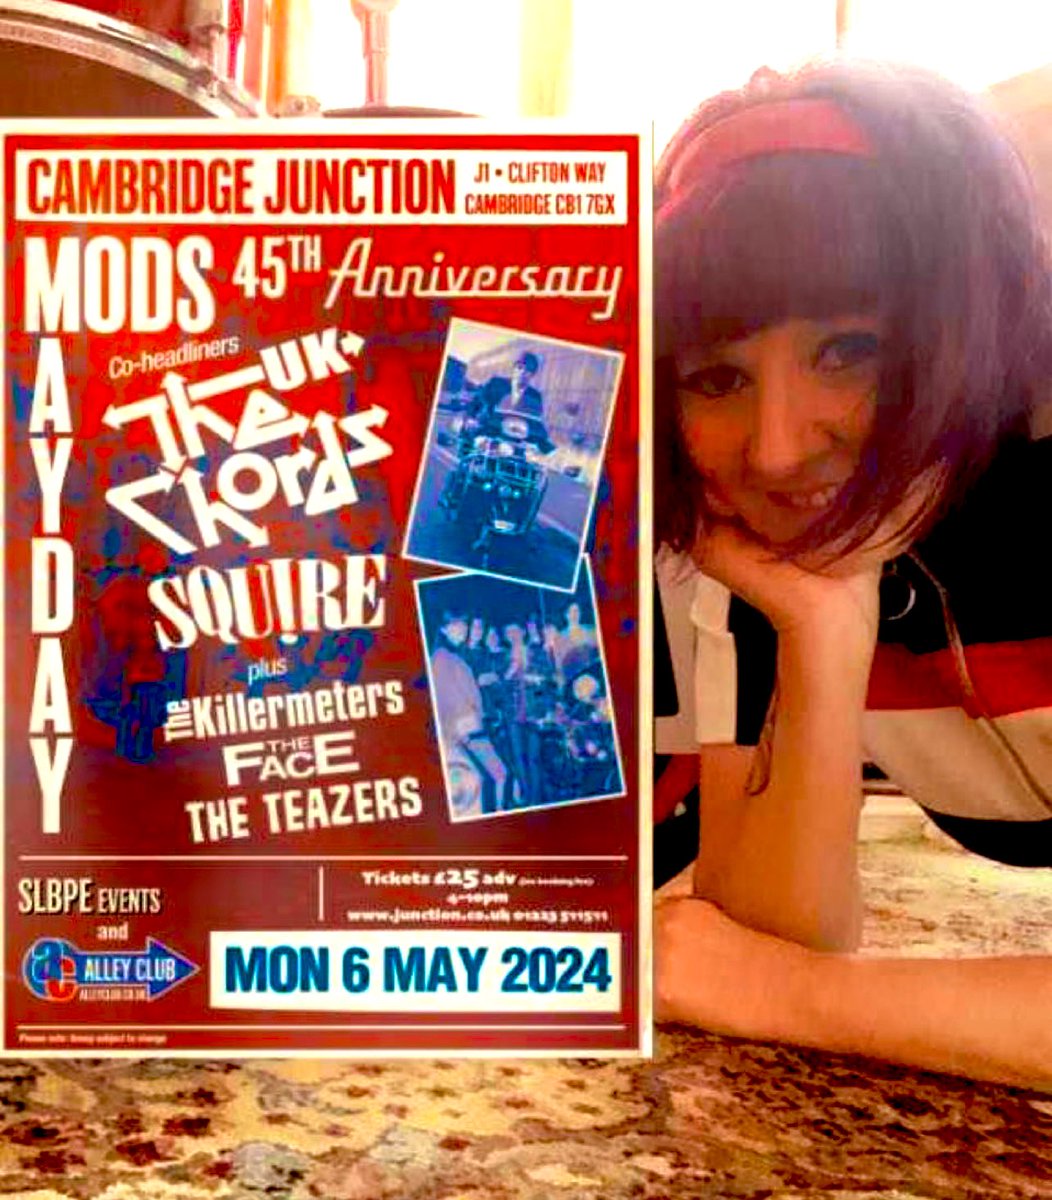 Grazie mille Morena Tait for providing some photos of you and the MODS MAYDAY CAMBRIDGE - 45th ANNIVERSARY flier. Tickets: junction.co.uk/events/mods-ma… 📸 Morena Tait & Paul Sawtell